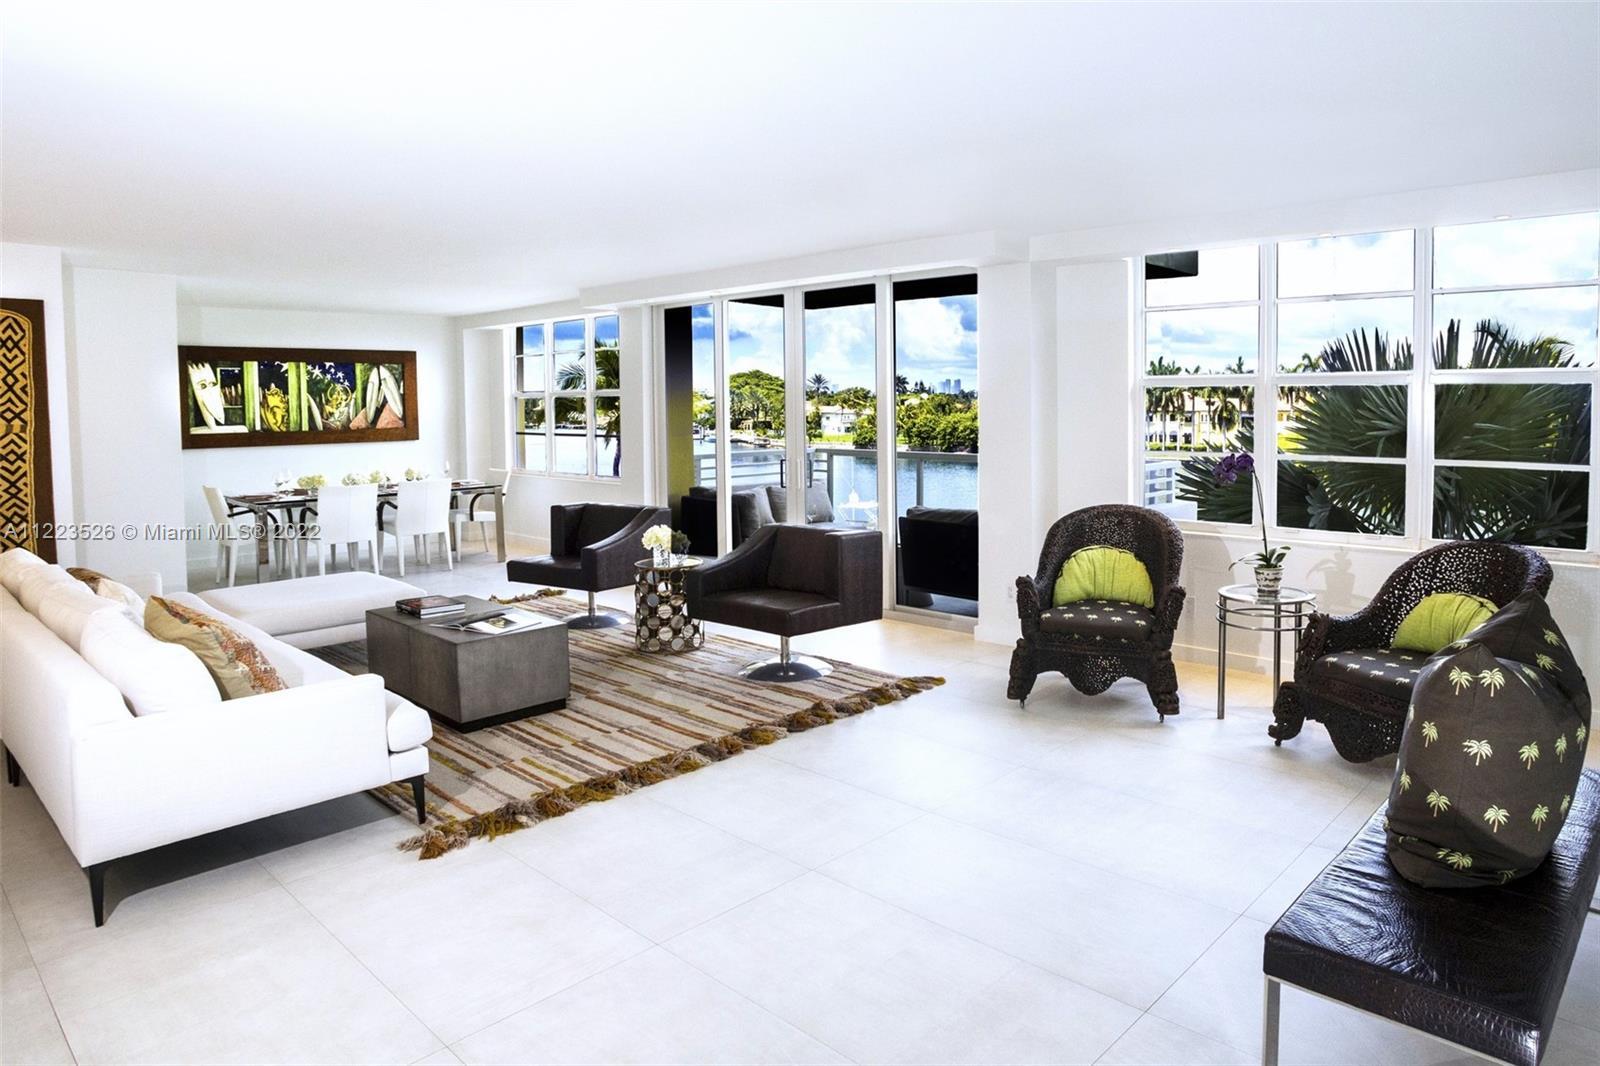 Intracoastal water views from every room welcome you in this impeccably remodeled waterfront residen